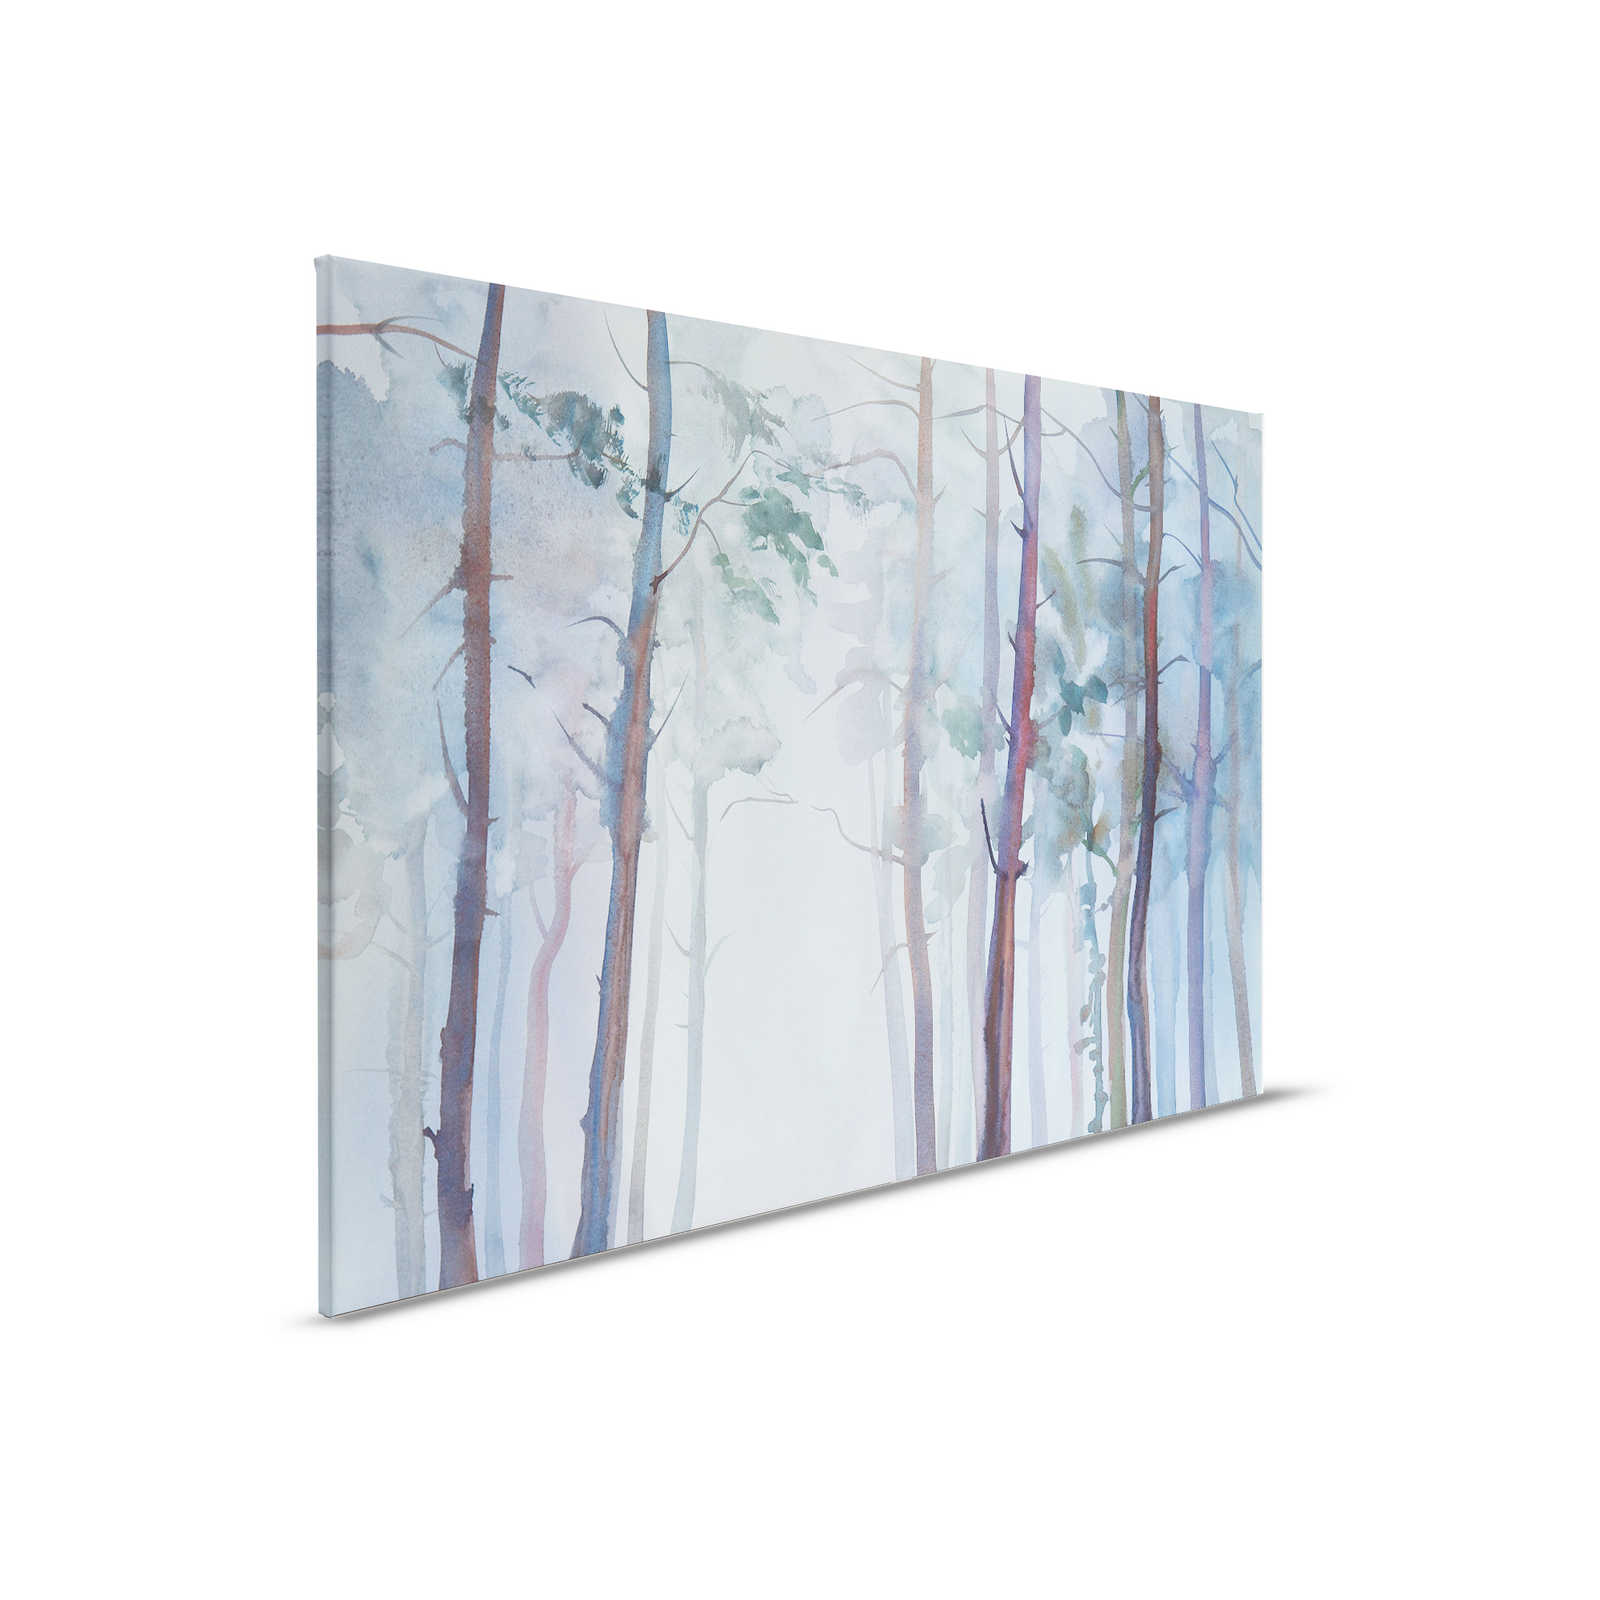 Canvas with forest motif in watercolour style - 0.90 m x 0.60 m
